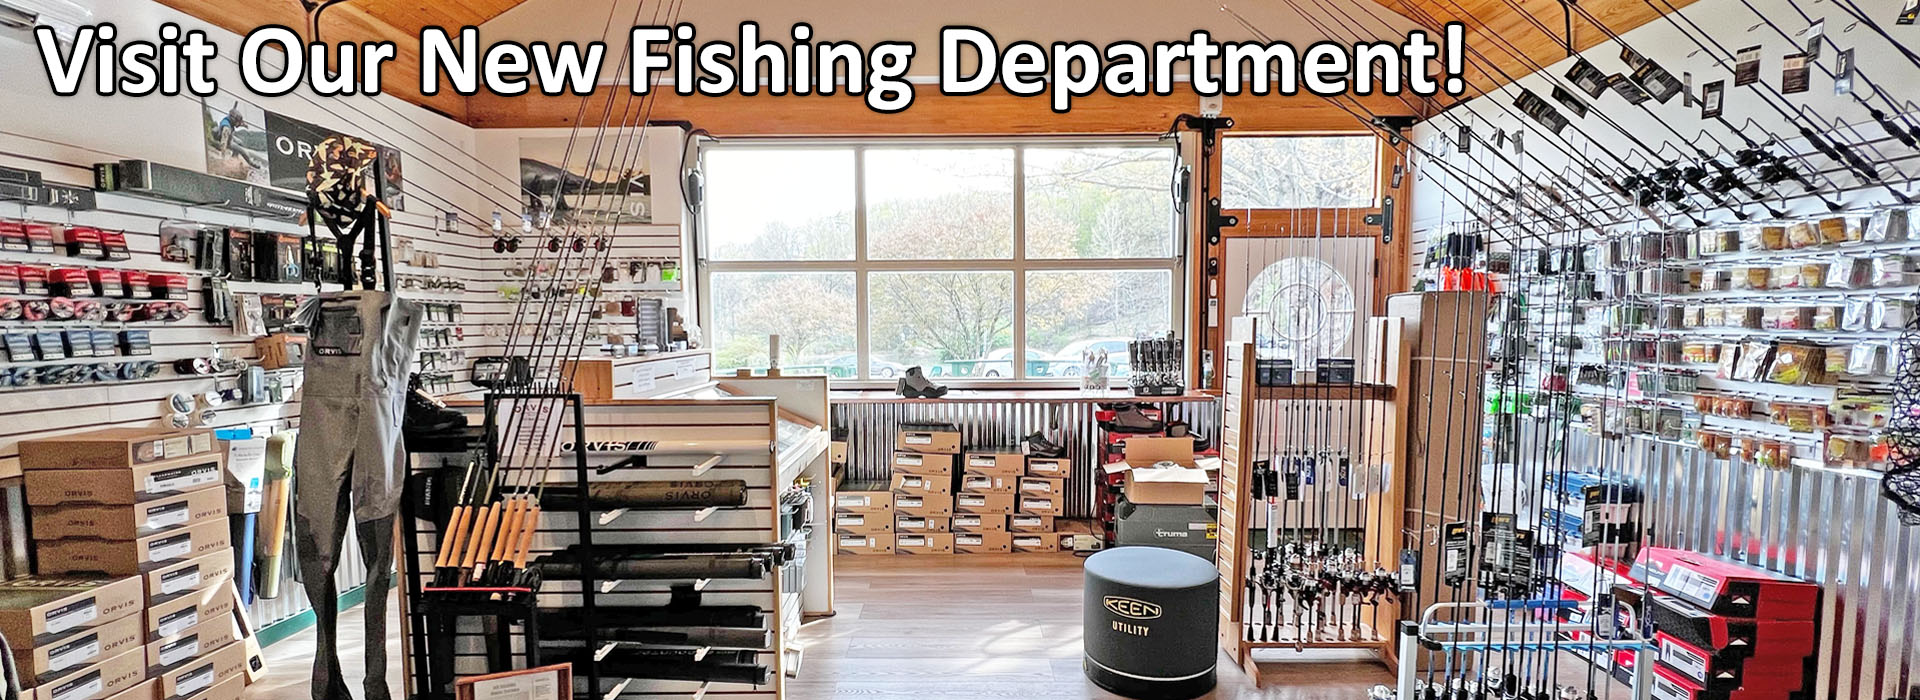 Visit Our New Fishing Department. Image of Kenco's fishing department. Image shows fly fishing rods, spin cast fishing rods, wading boots, chest waders, and various fishing tackle displayed on the walls